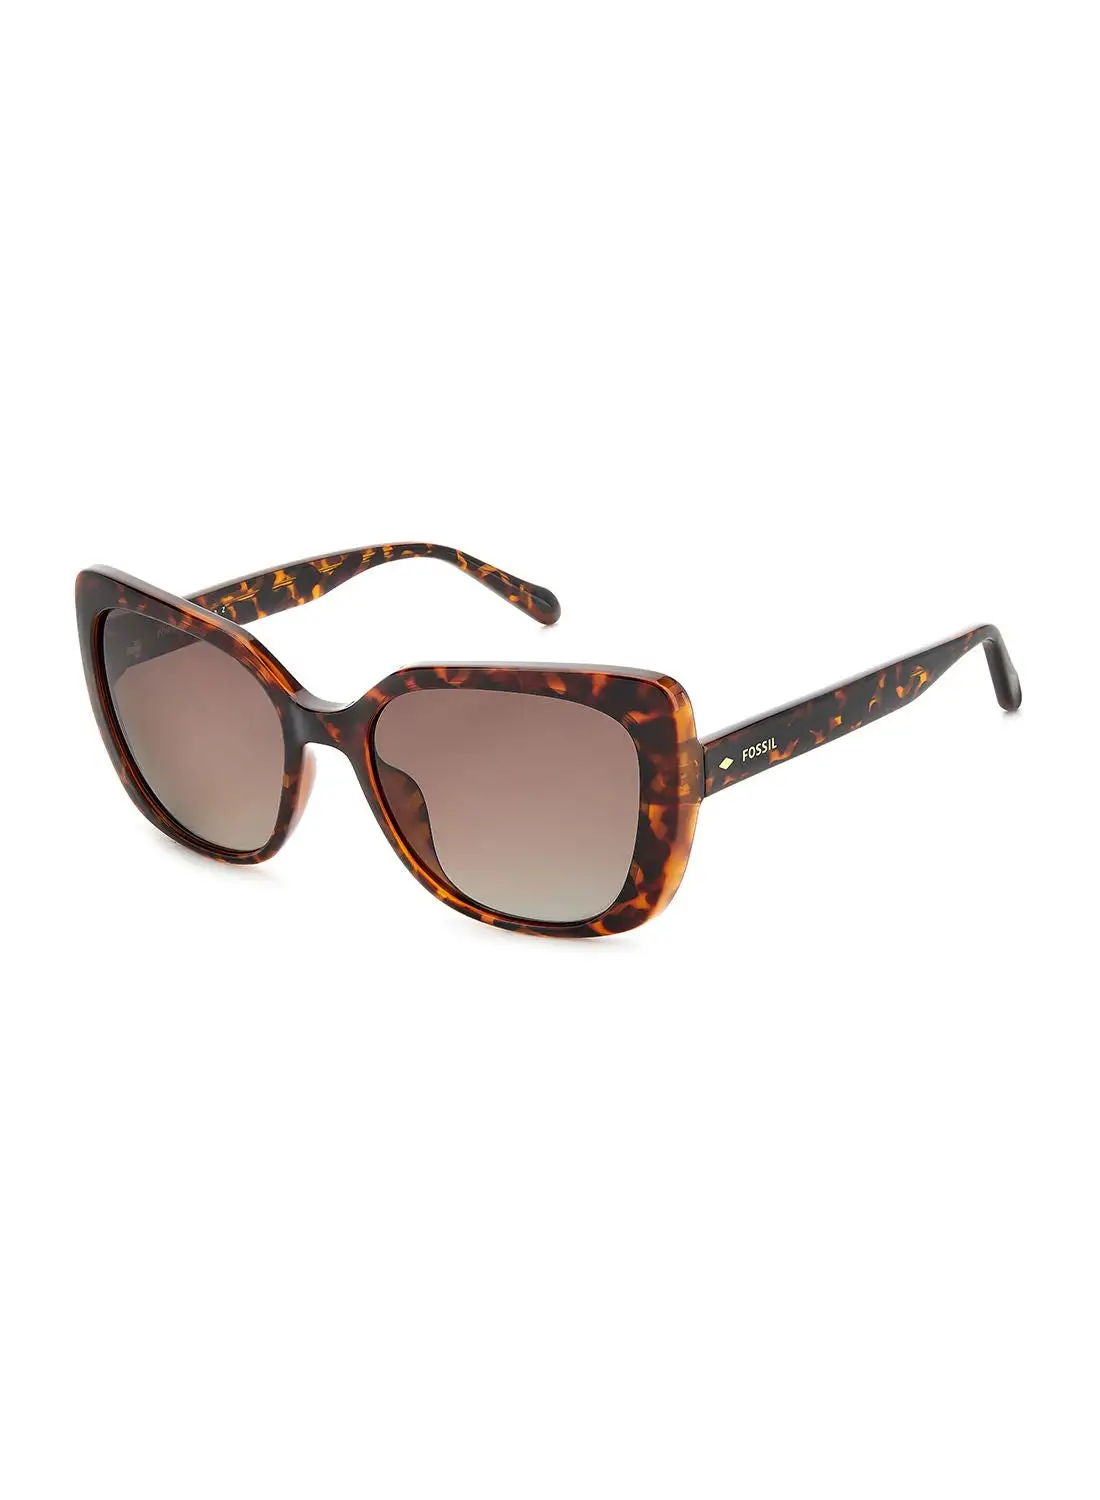 FOSSIL Women's UV Protection Square Sunglasses - Fos 3143/S Hvn 55 - Lens Size: 55 Mm